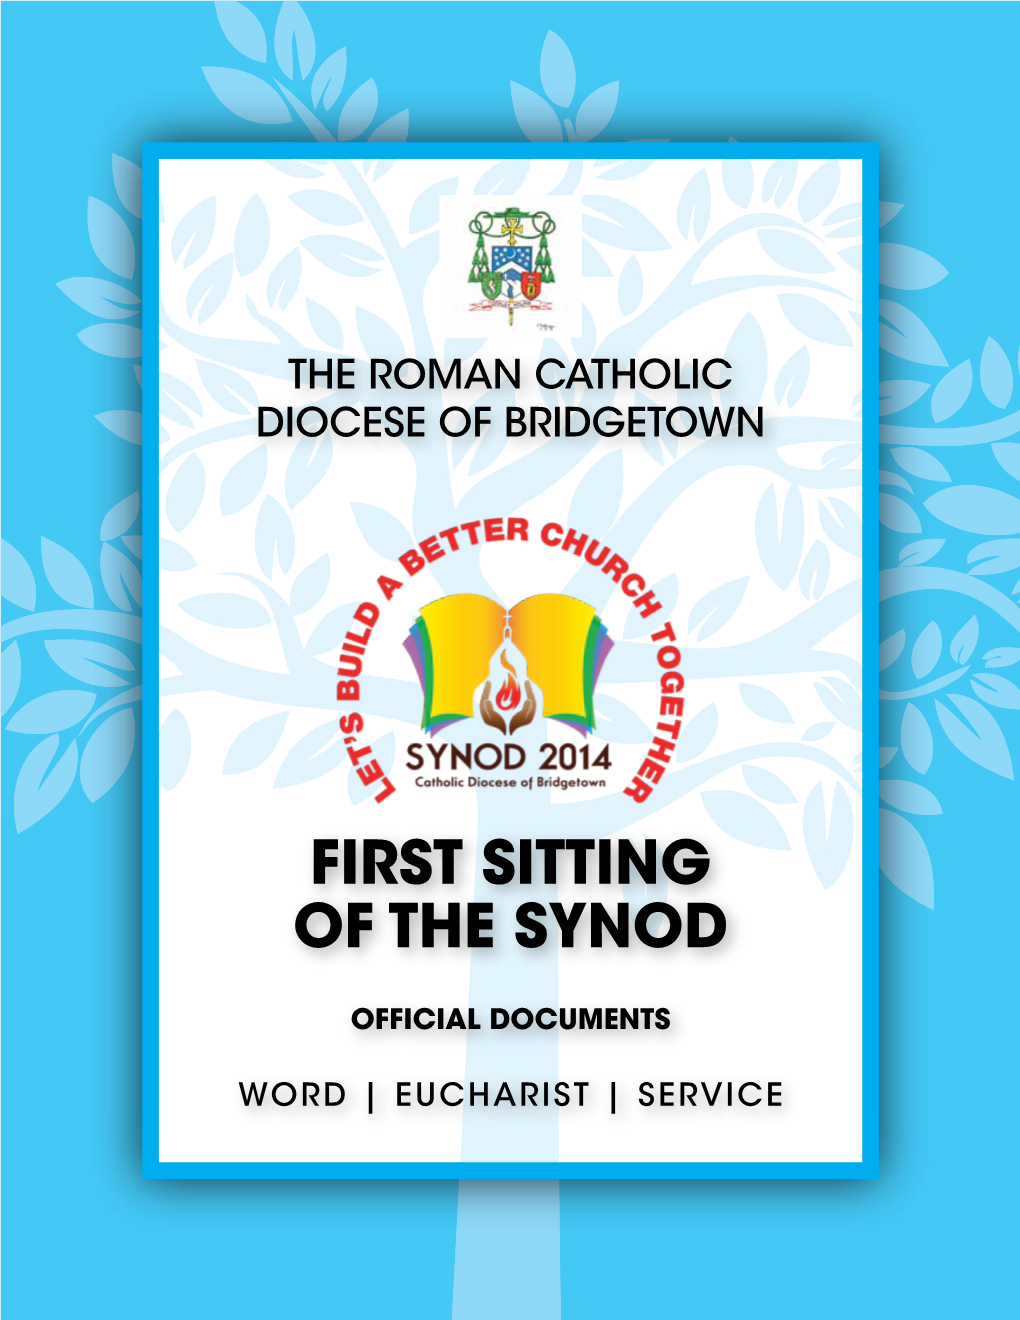 First Sitting of the Synod